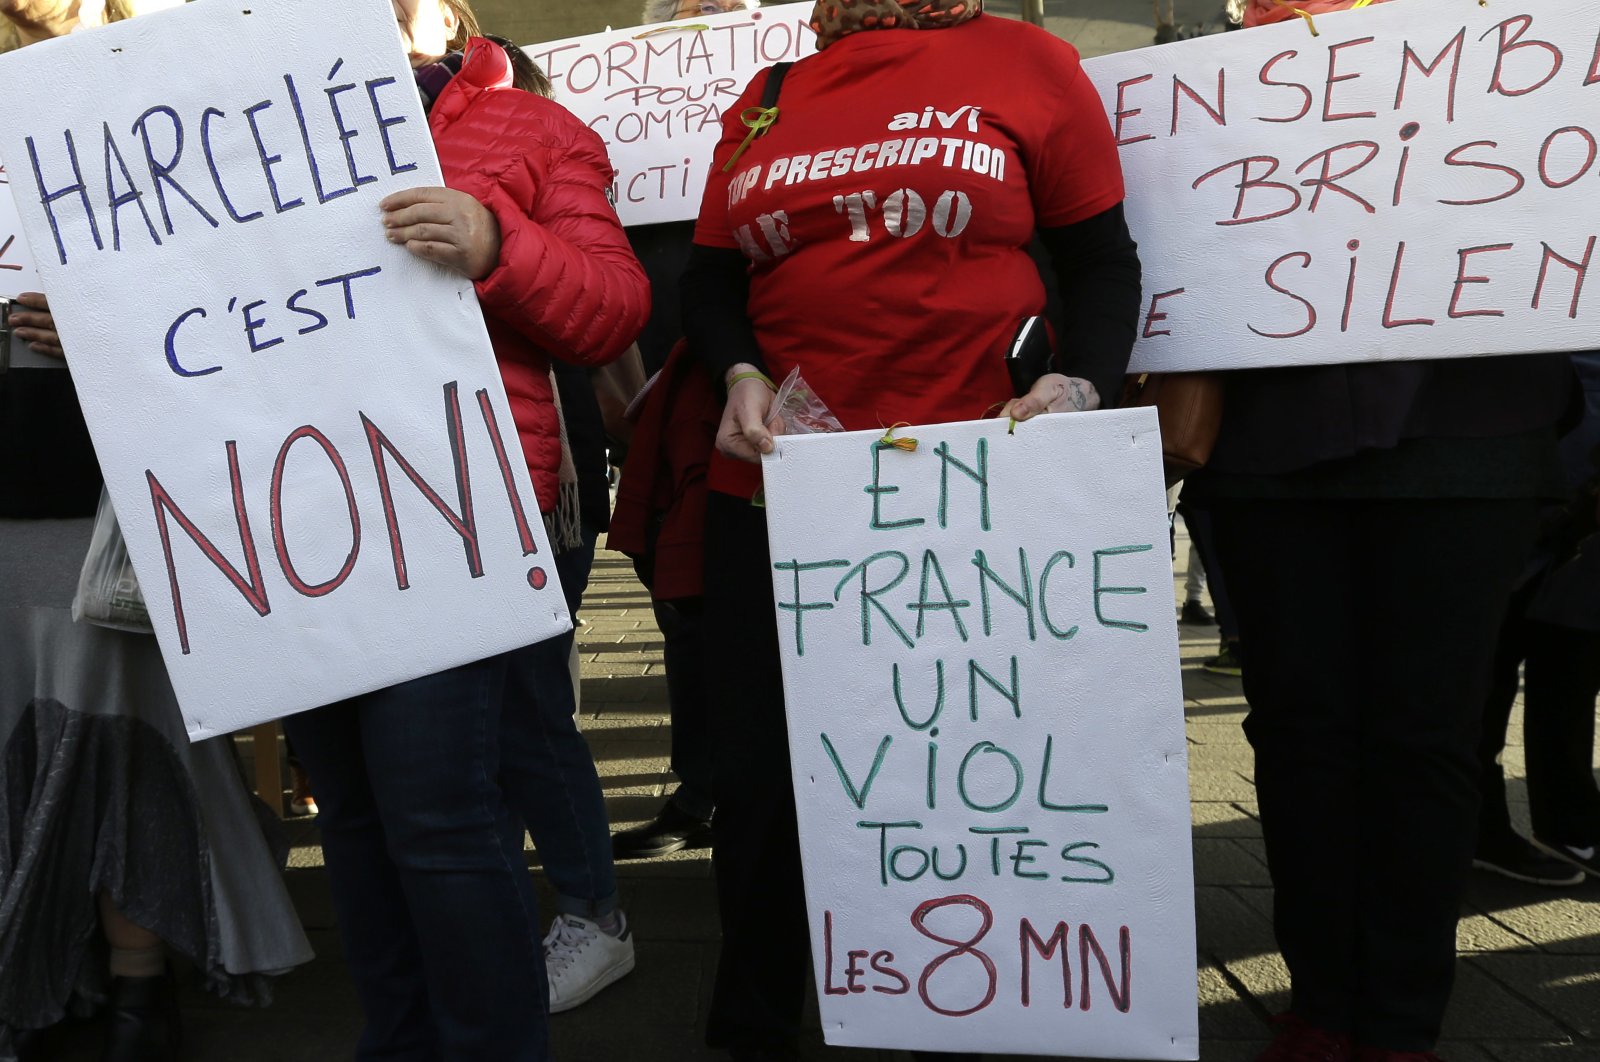 A demonstrator holds placard reading "Harassed it is no," "In France a rape every 8 minutes" and "Together let us break the silence" during a demonstration in Marseille, France, Oct. 29, 2017. (AP Photo)